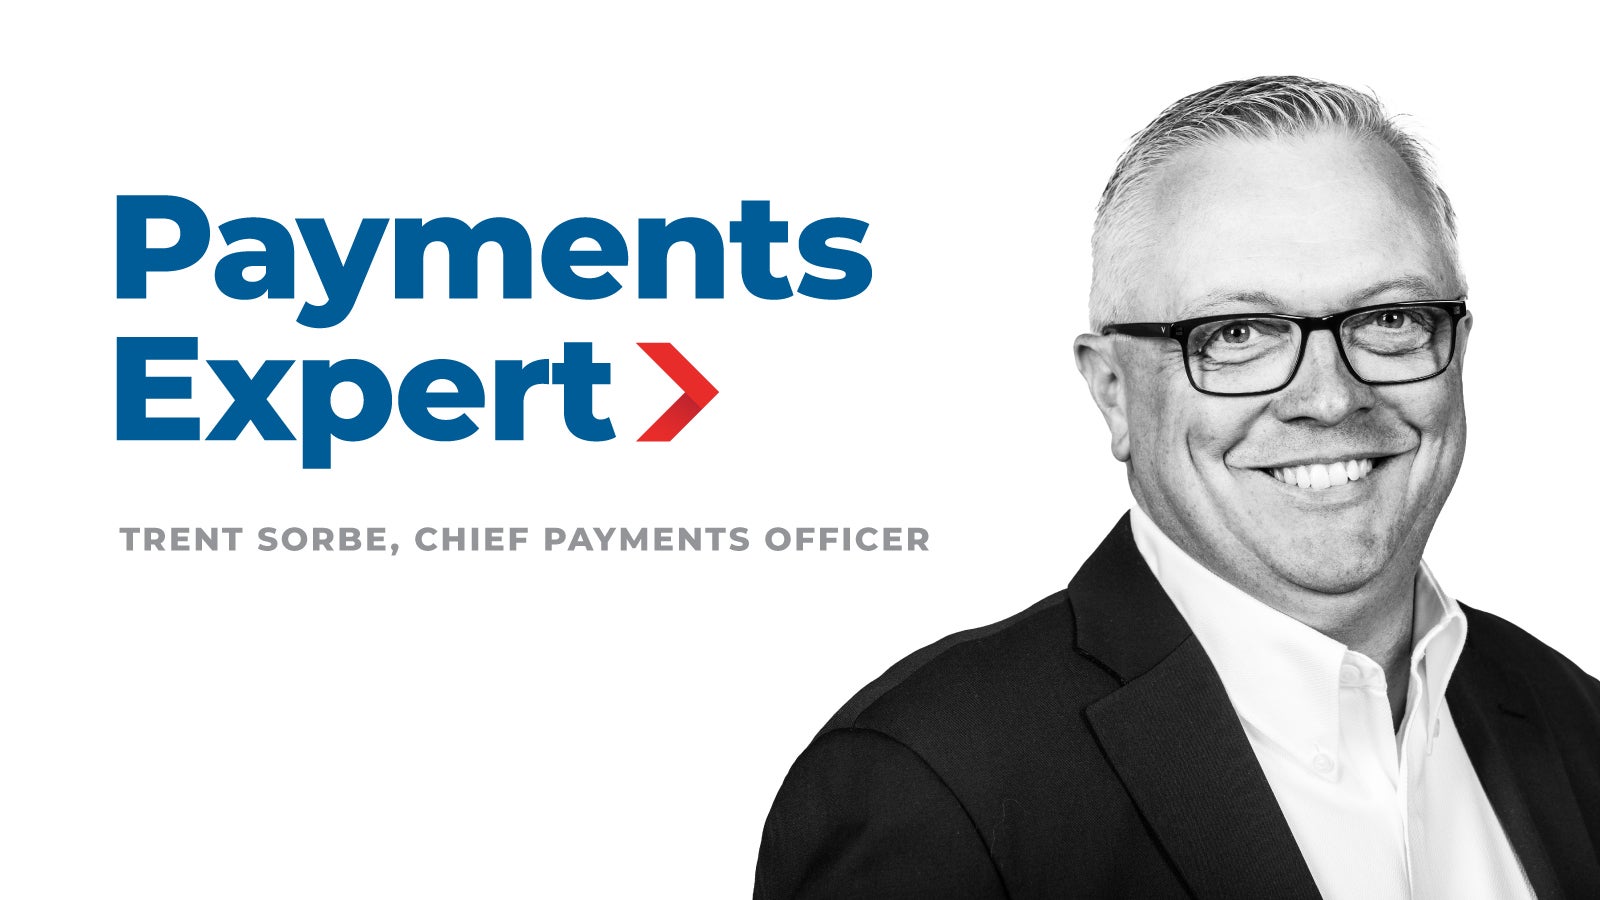 Payments Expert image with Chief Payments Officer